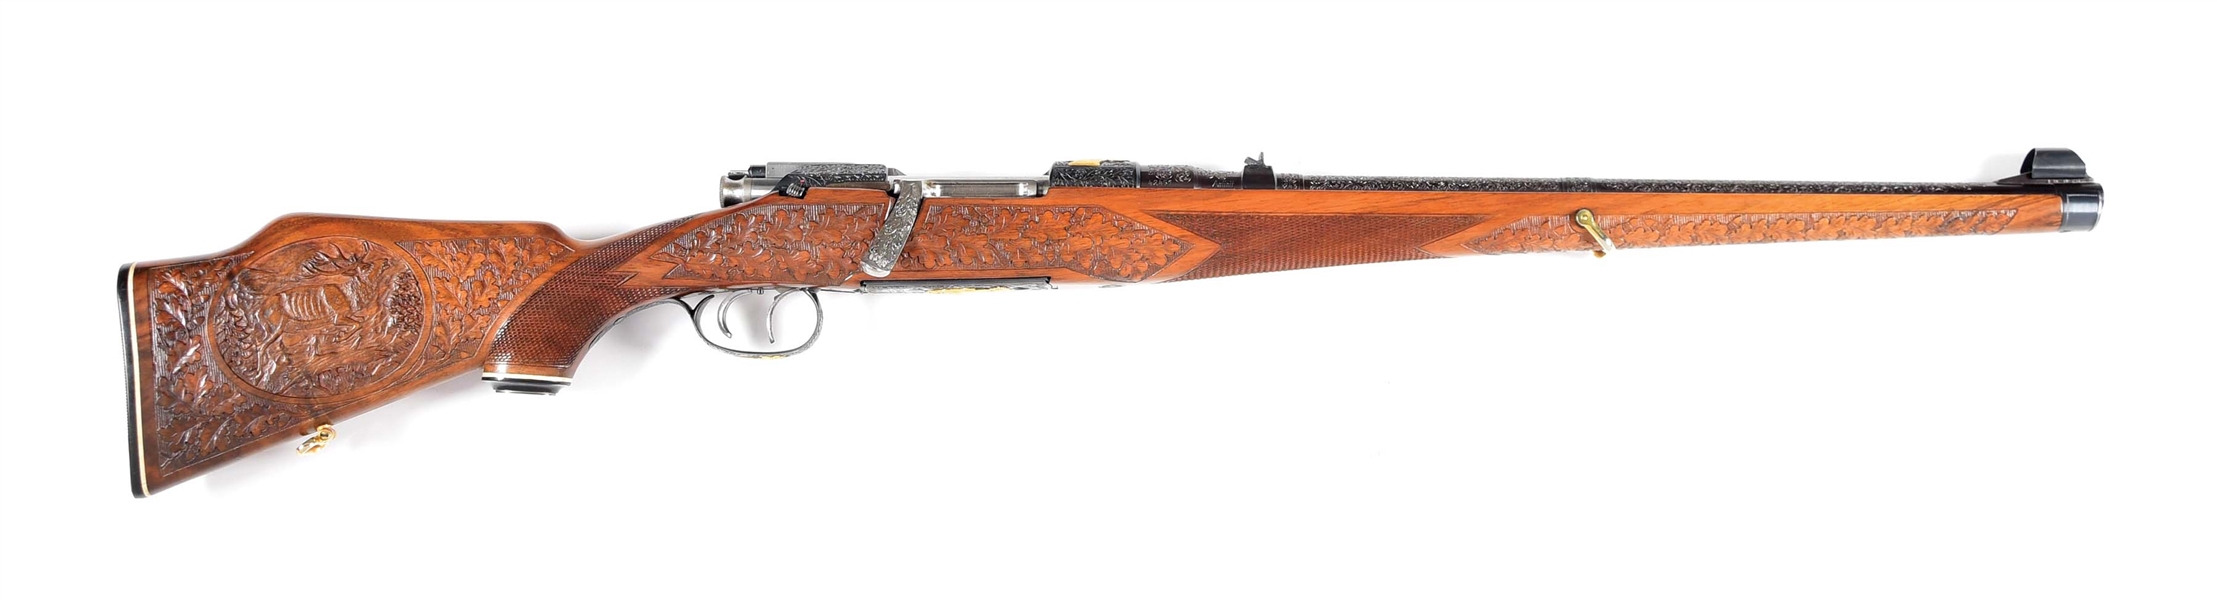 (C) OVER-THE-TOP MANNLICHER SCHOENAUER MODEL 1961 MCA CARBINE WITH NEARLY EVERY POSSIBLE FACTORY CUSTOM EMBELLISHMENT INCLUDING STOCK CARVINGS AND GOLD INLAY.